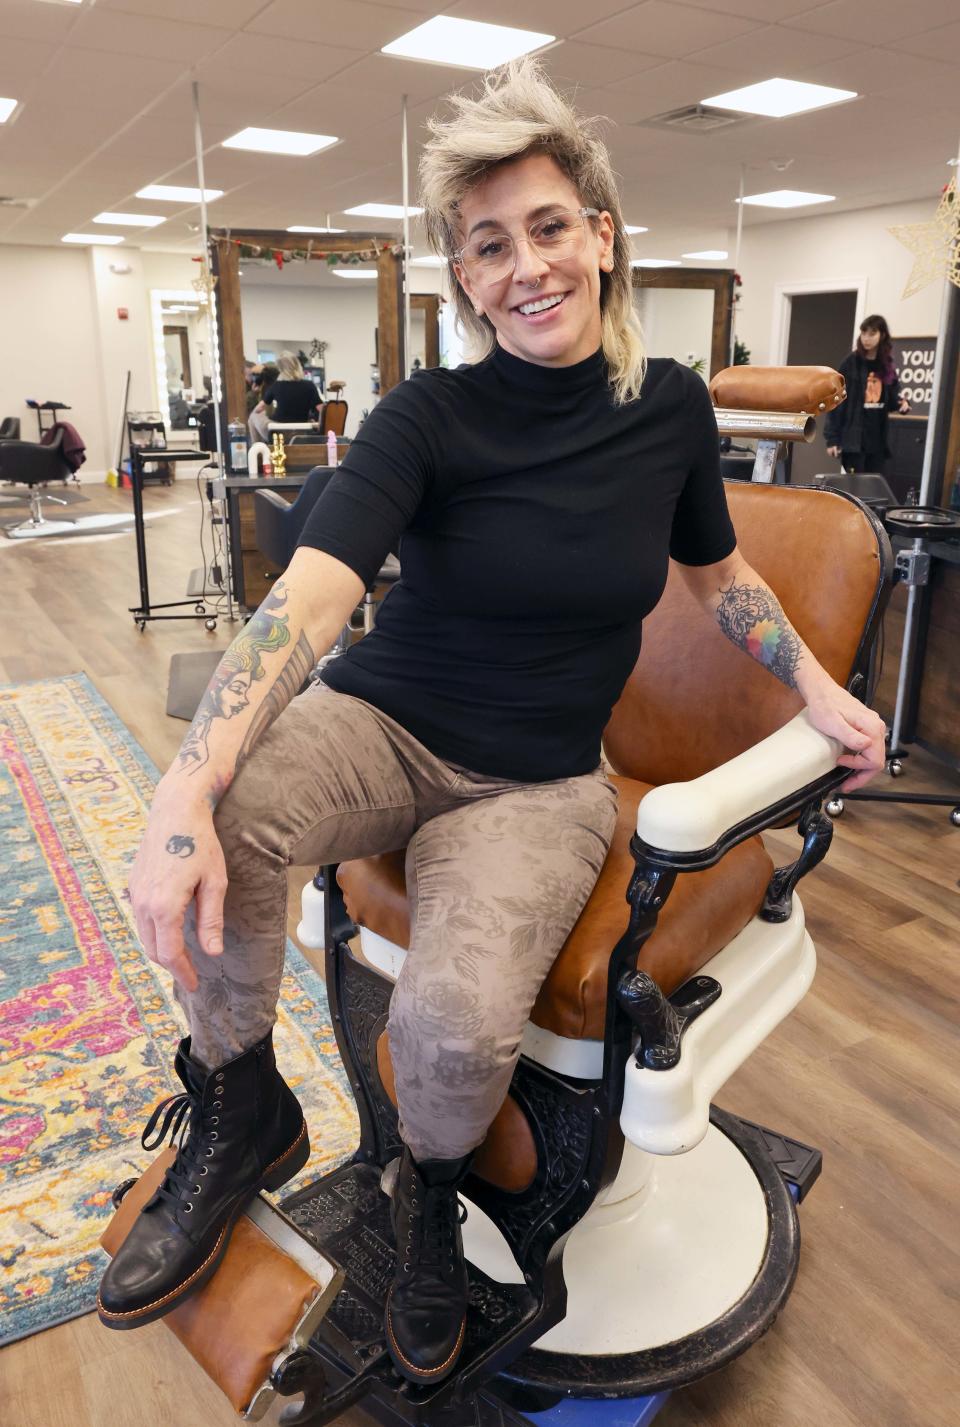 Missy Battaglia, owner of Revolutions Salons, sits in her grandfather's barber shop chair in the salon's new location at 15 Fireworks Circle, Bridgewater on Thursday, Dec. 8, 2022. Her grandfather, a Boston barber, was still cutting hair at the age of 92, she said.